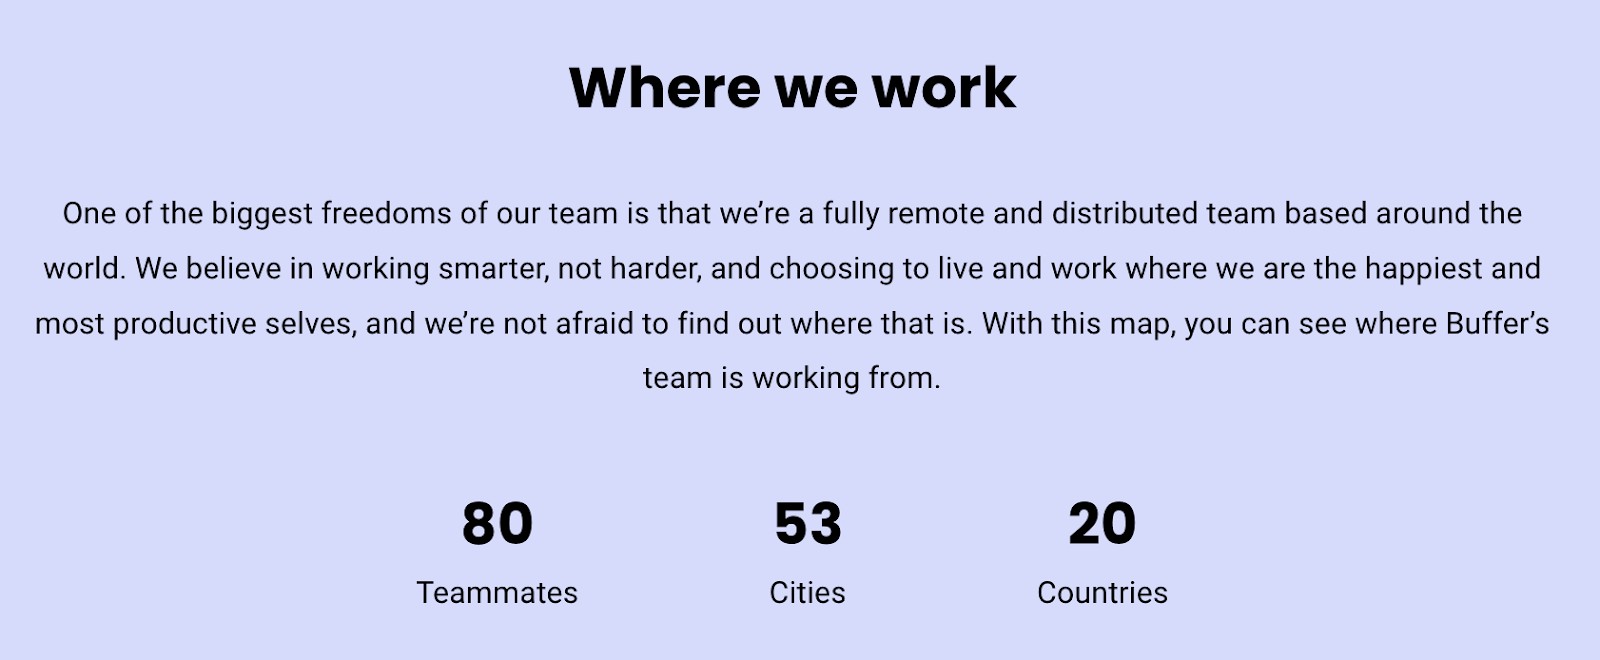 Interests on resume: A paragraph from Buffer’s website that describes their remote work company. 